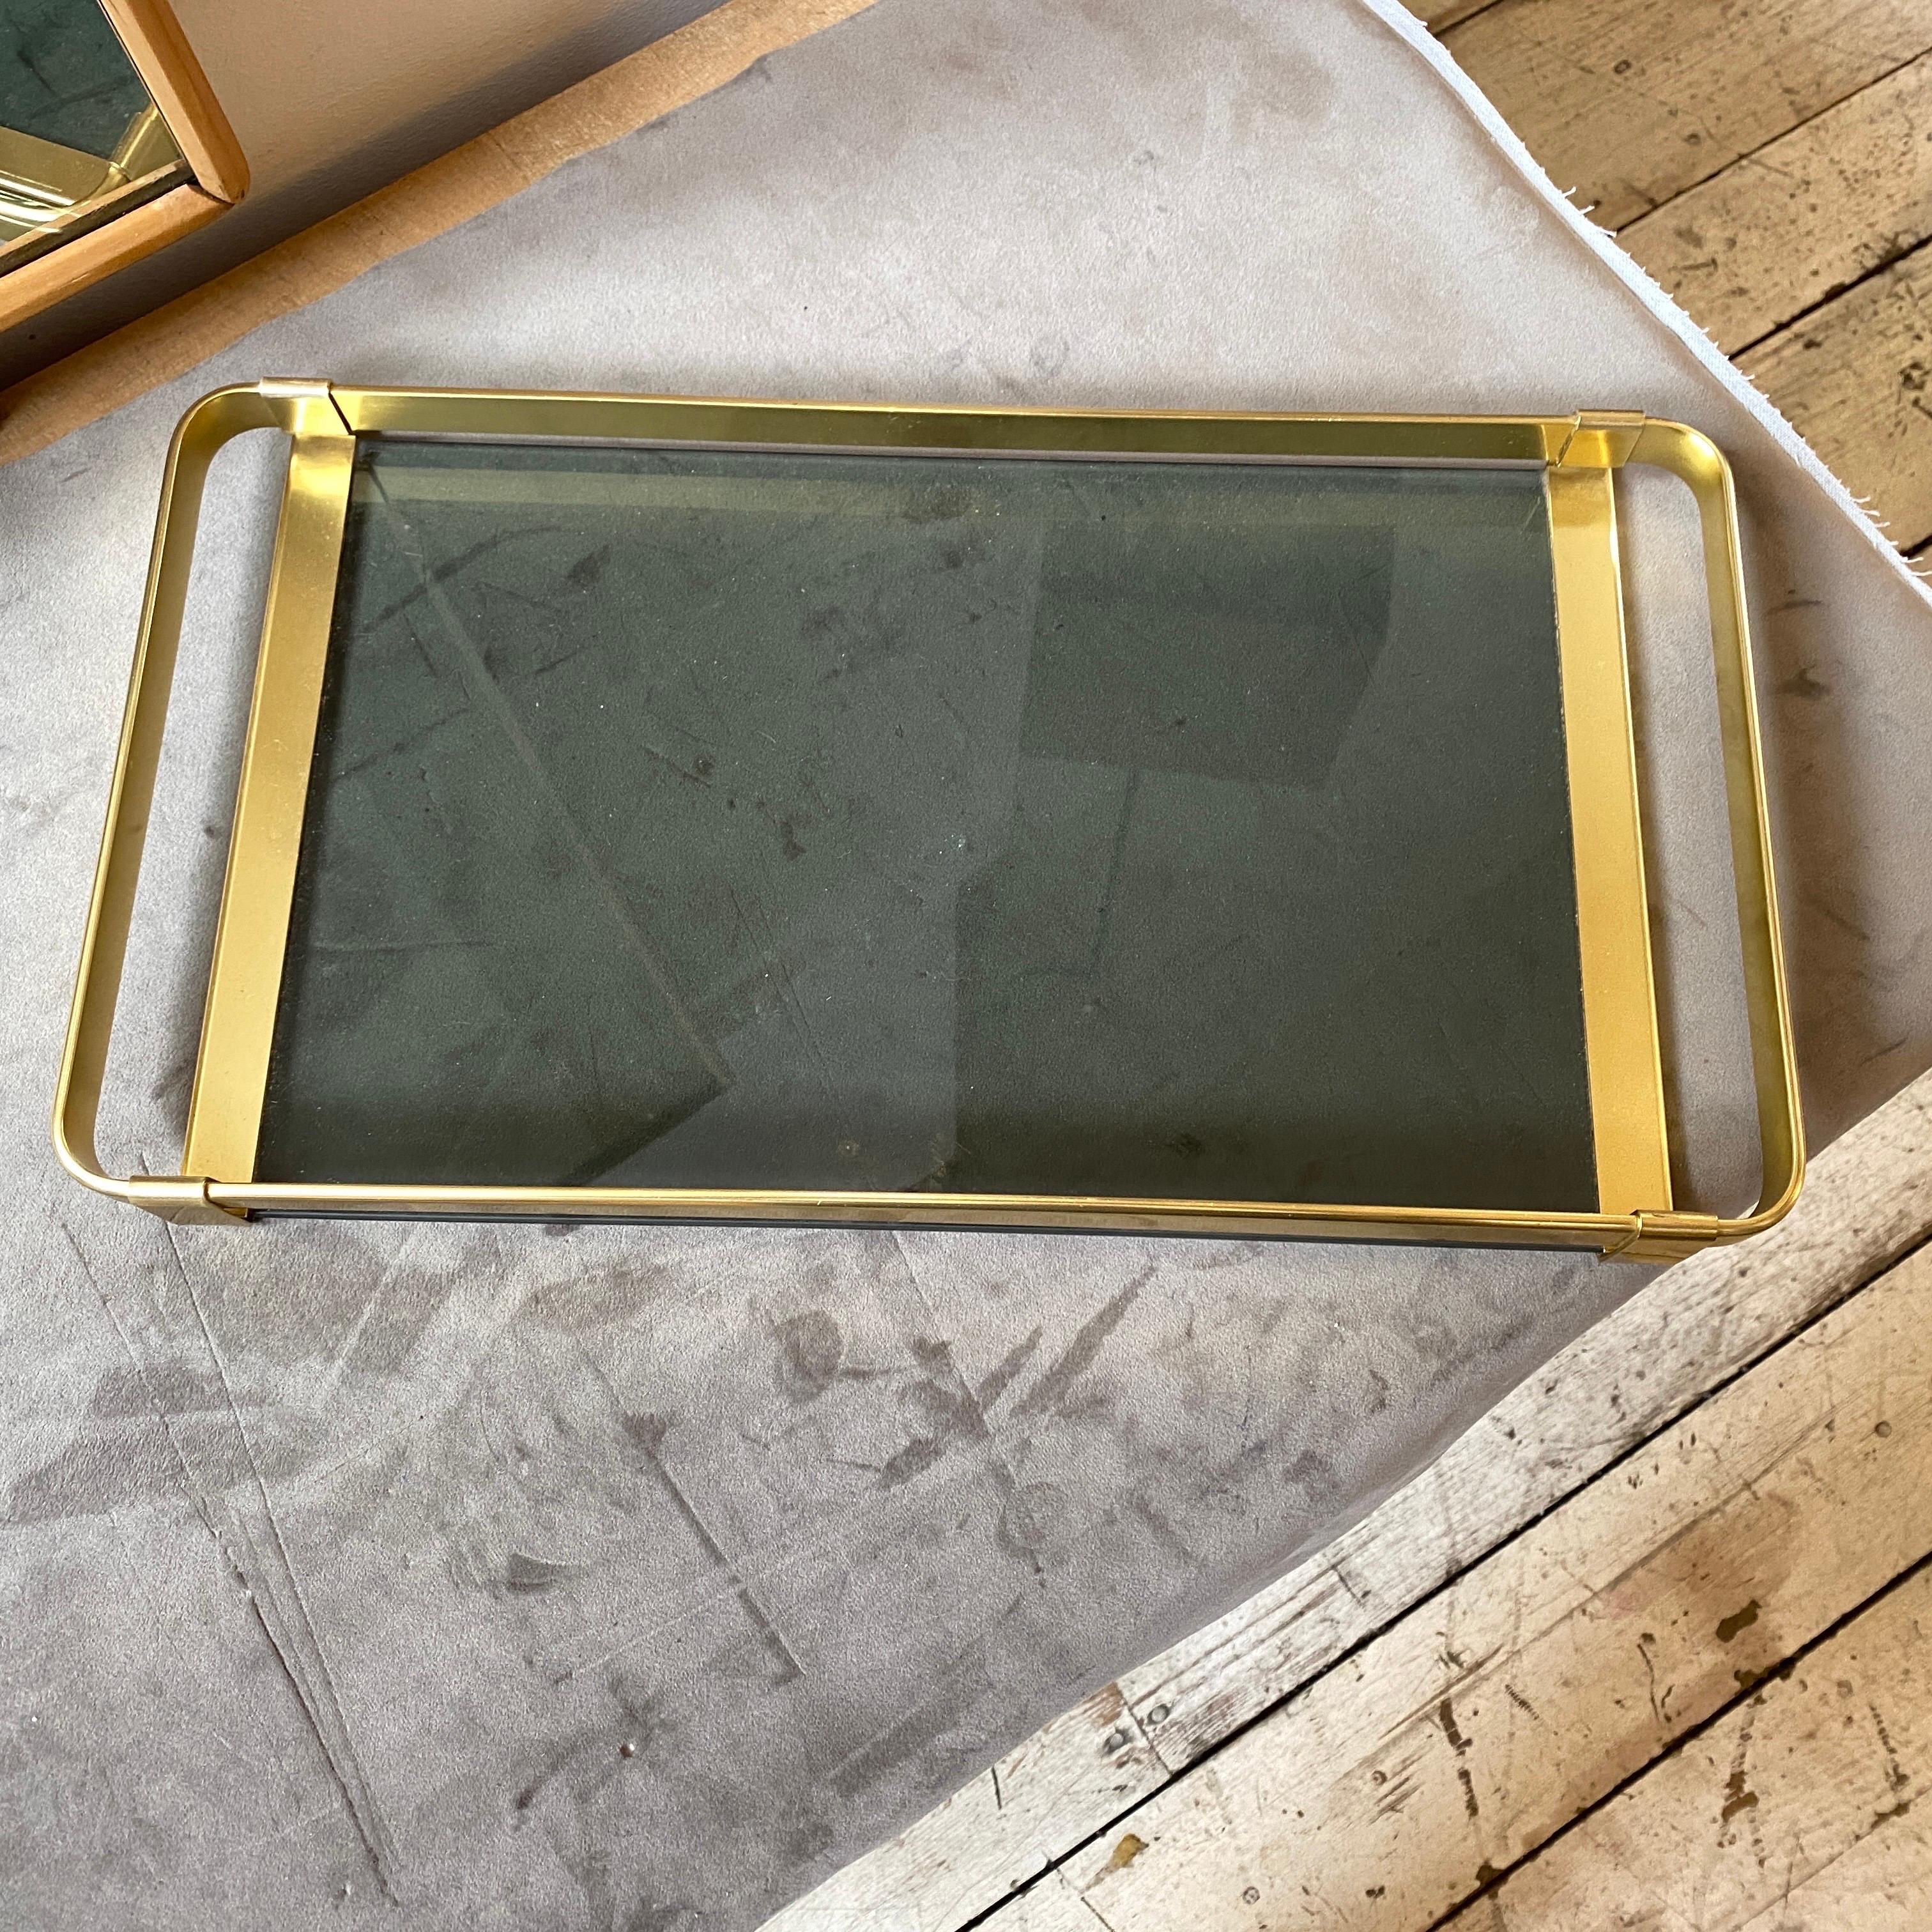 A brass and smoked glass serving tray made in Italy in the Sixties, it's in lovely conditions, probably never used. The brass in original patina gives it a vibrant vintage look.